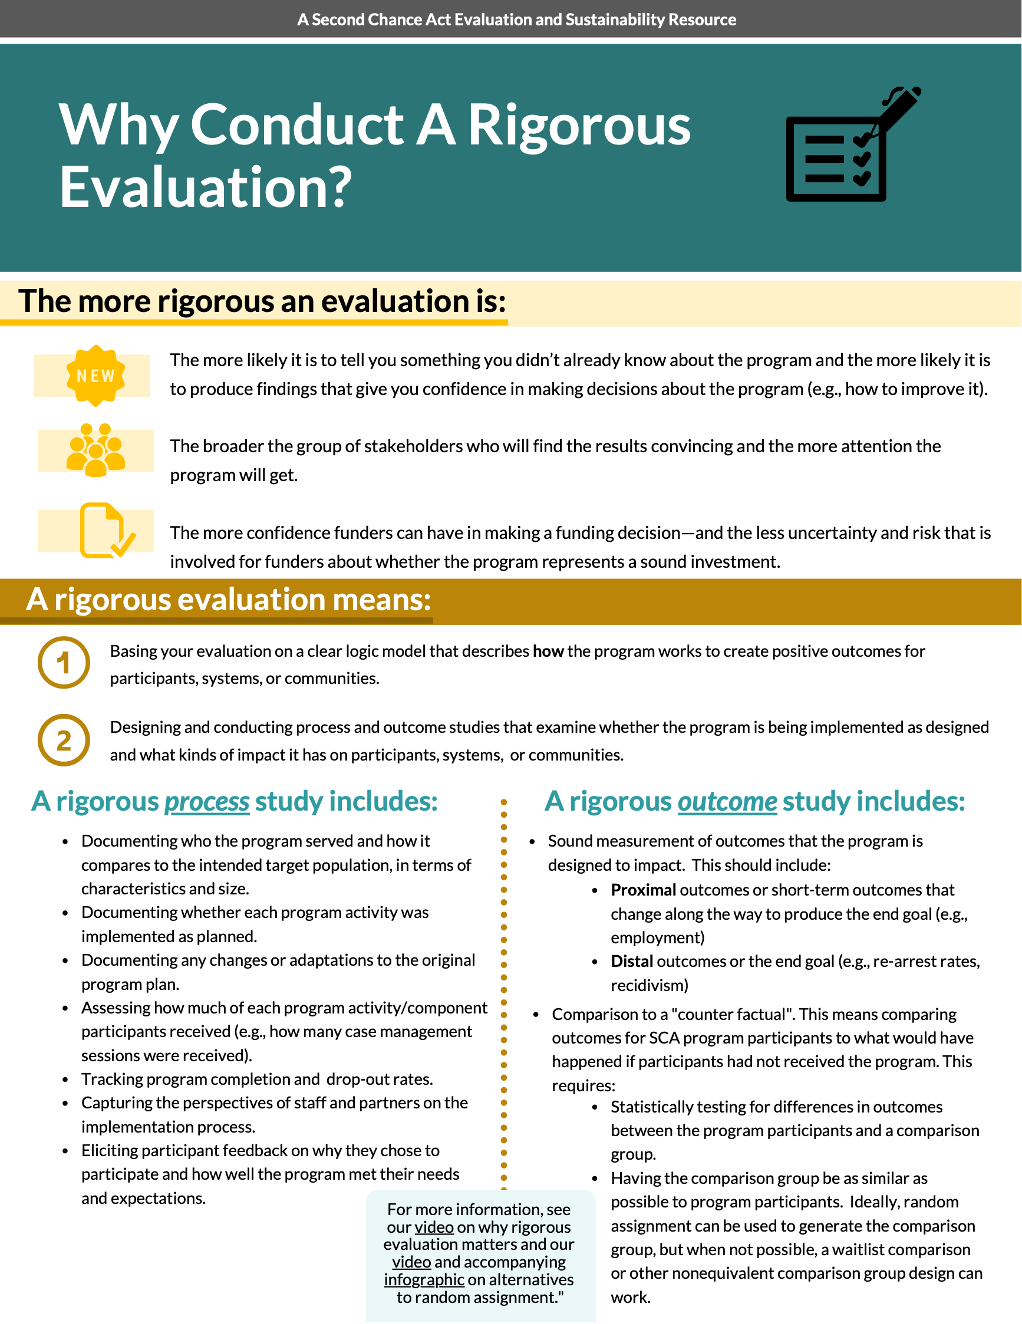 Why Conduct a Rigorous Evaluation infographic cover image